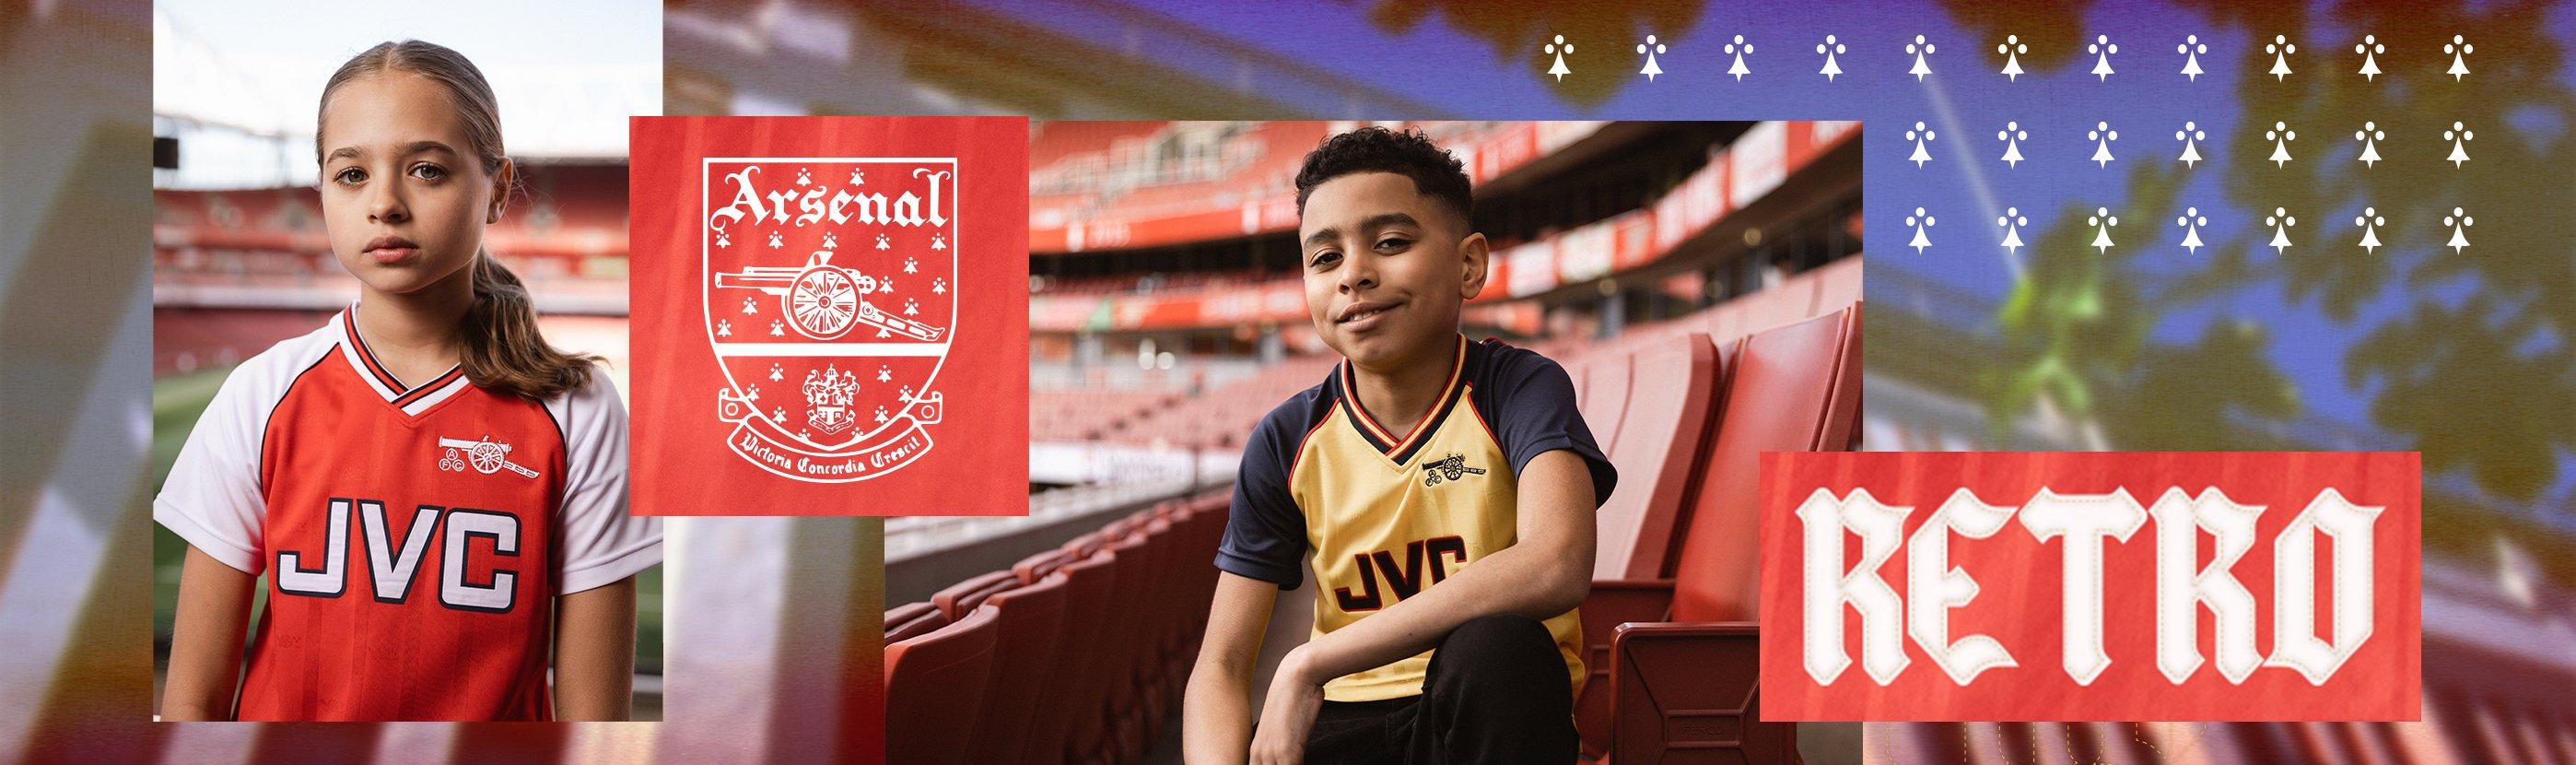 Official Arsenal Retro Kits & Collections